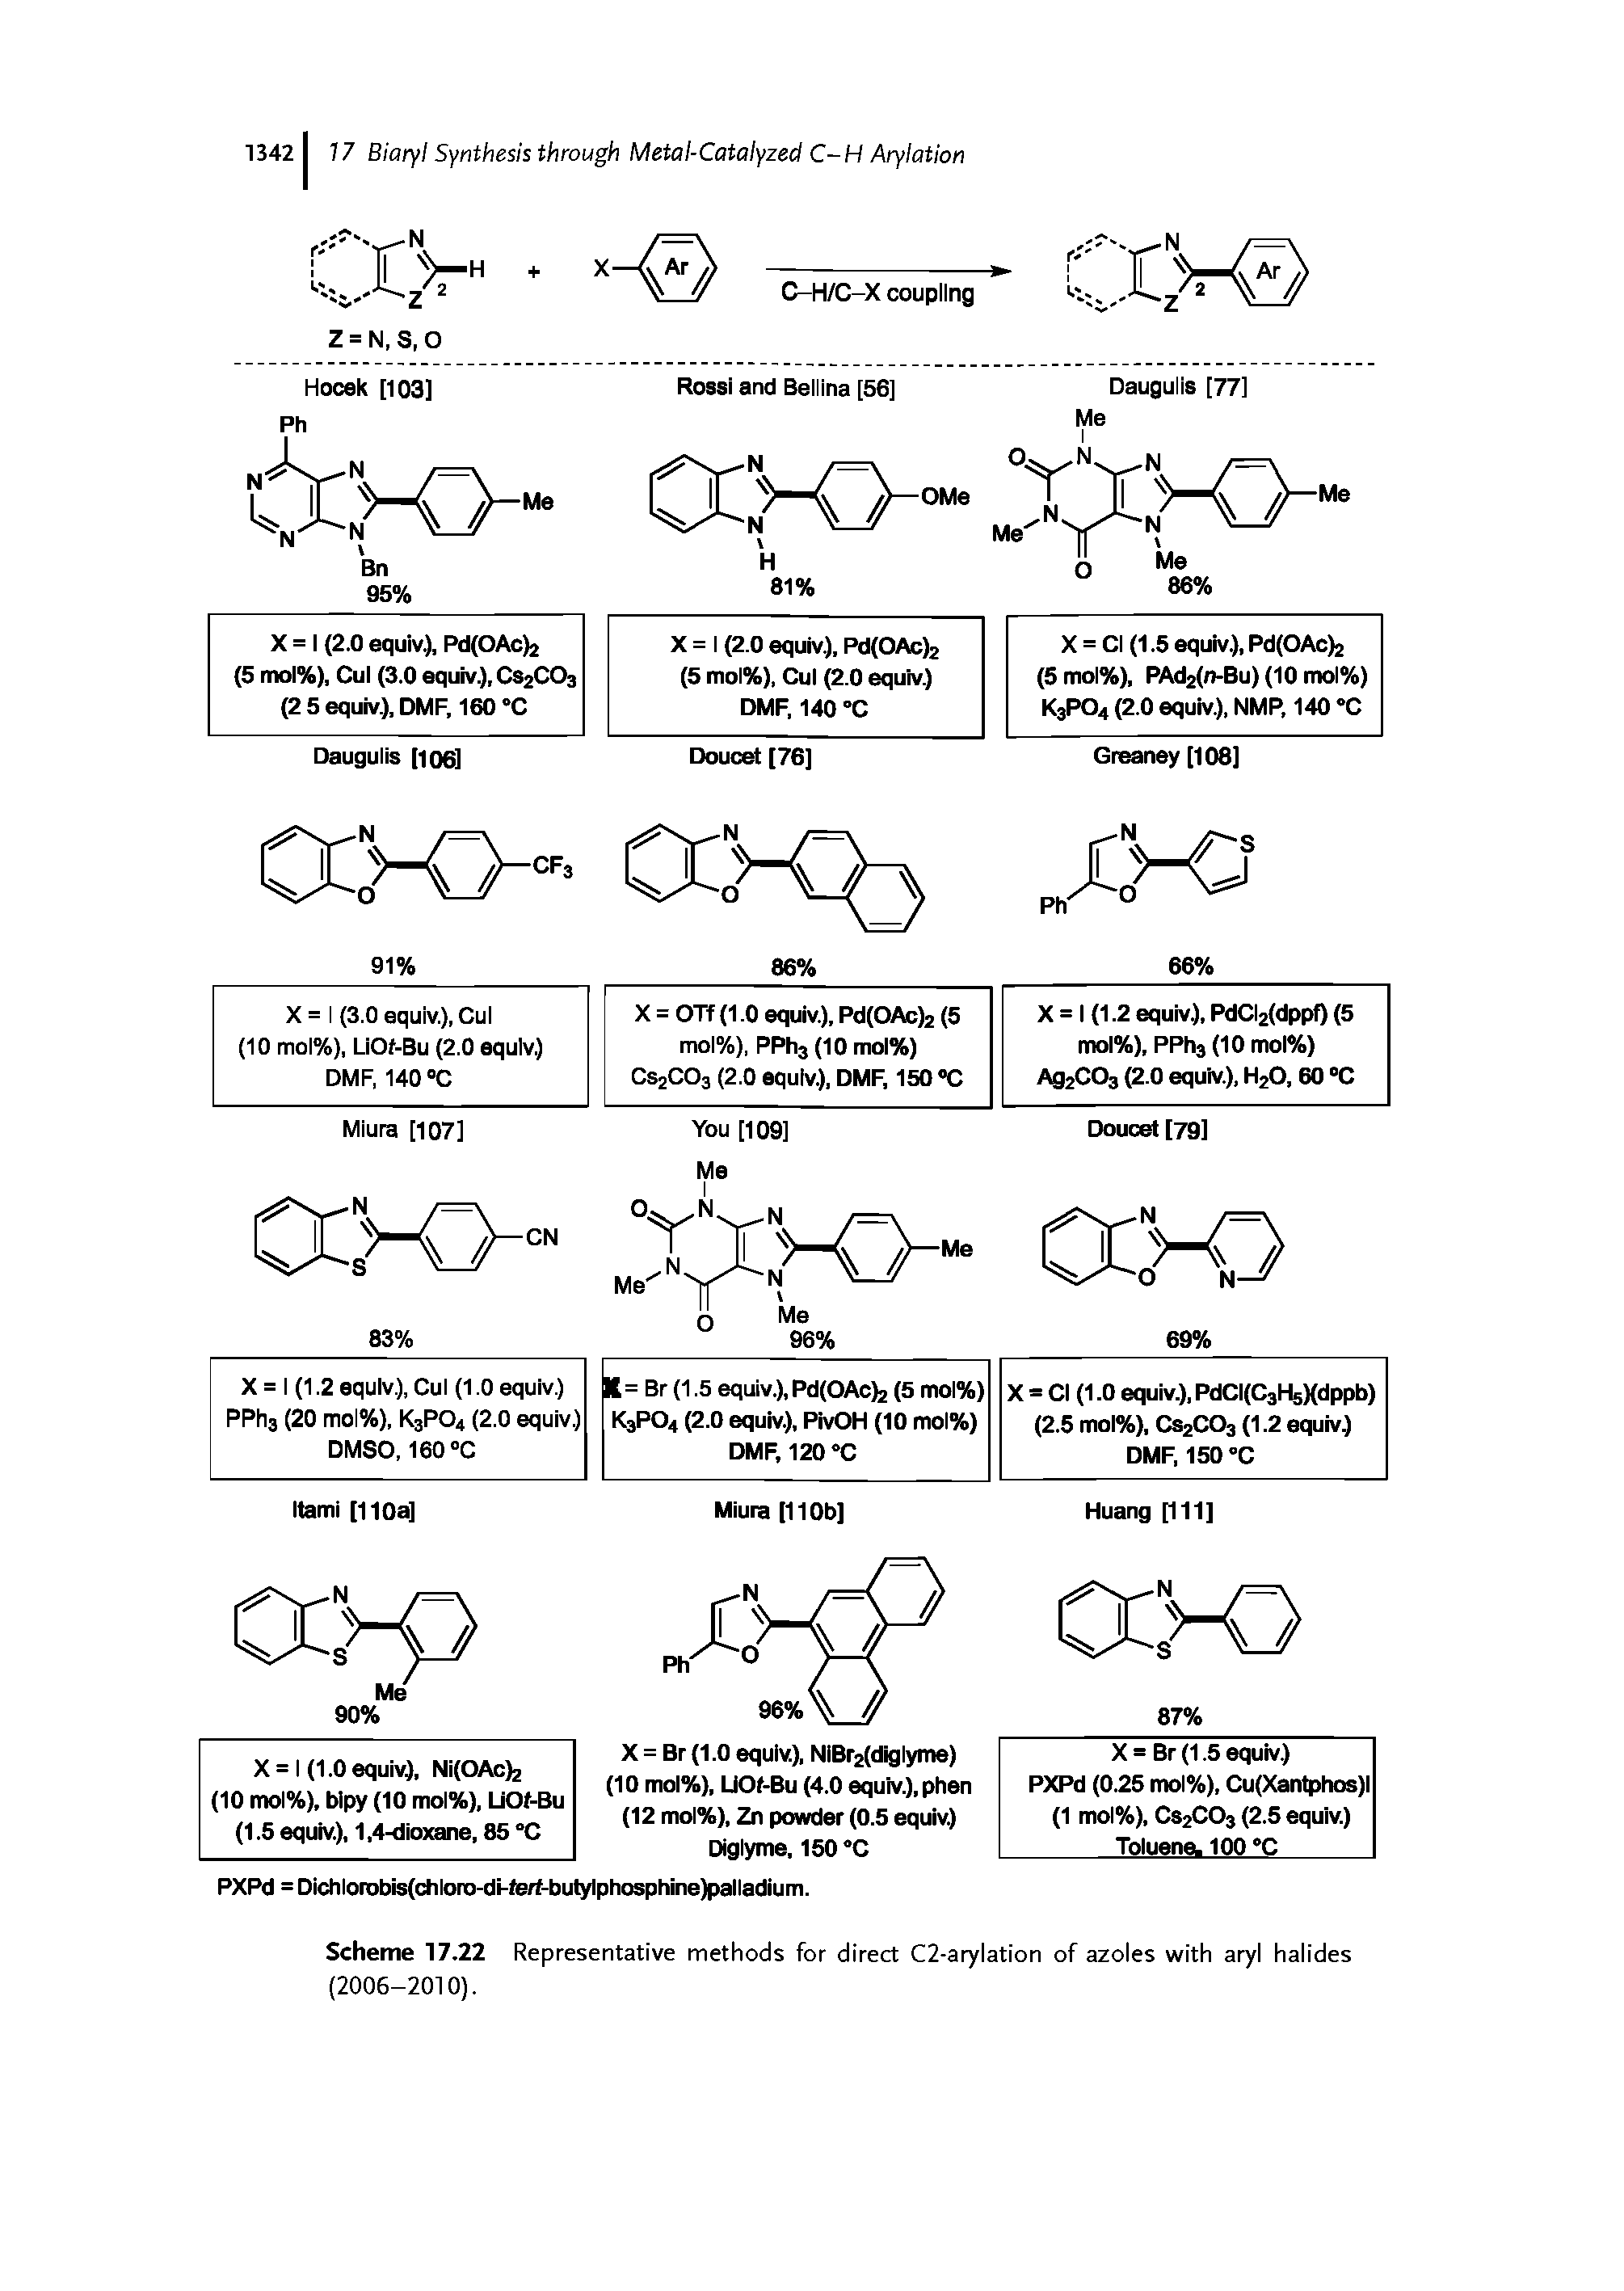 Scheme 17.22 Representative methods for direct C2-arylation of azoles with aryl halides (2006-2010).